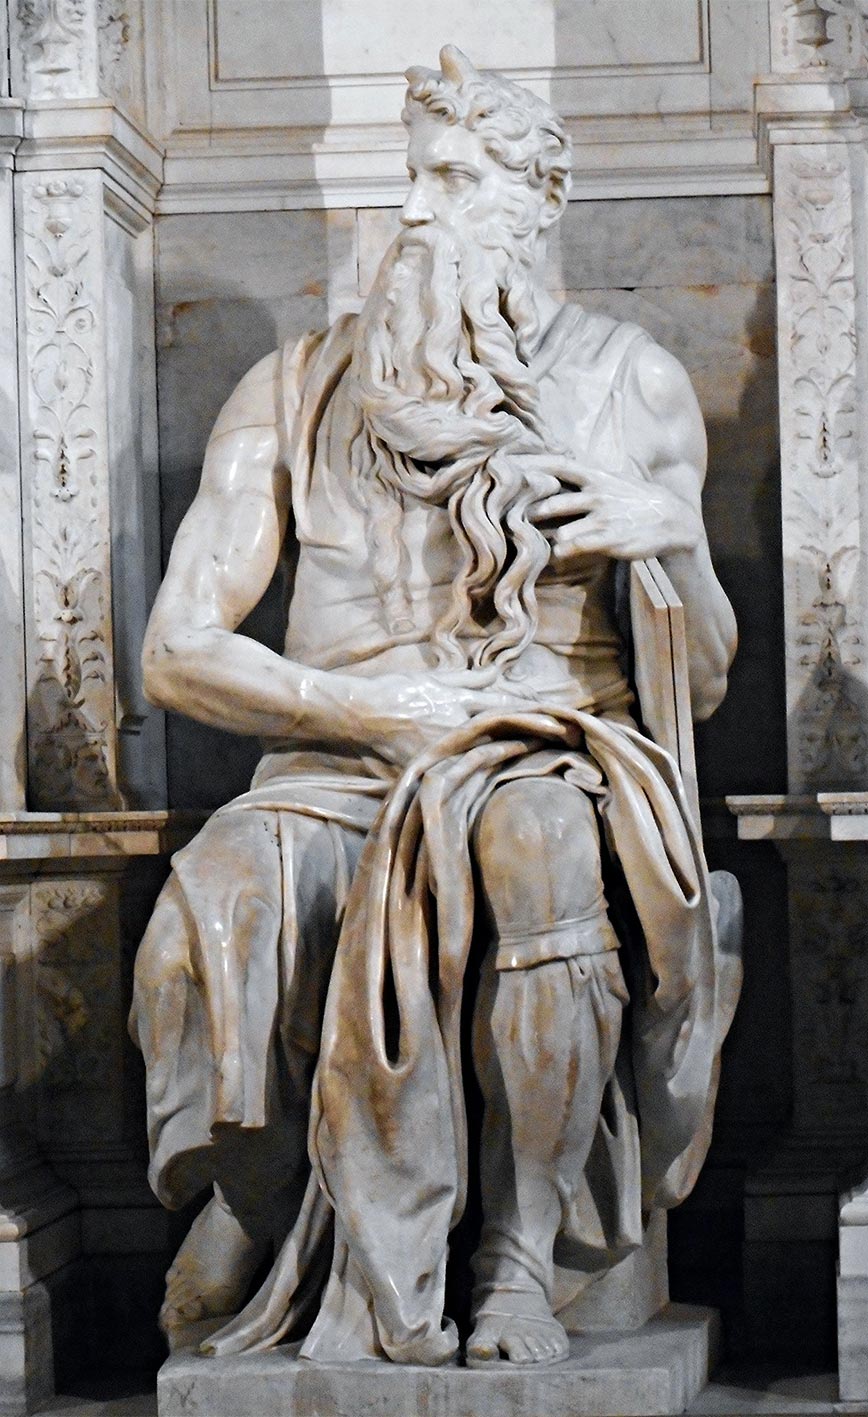 Michelangelo's statue of Moses